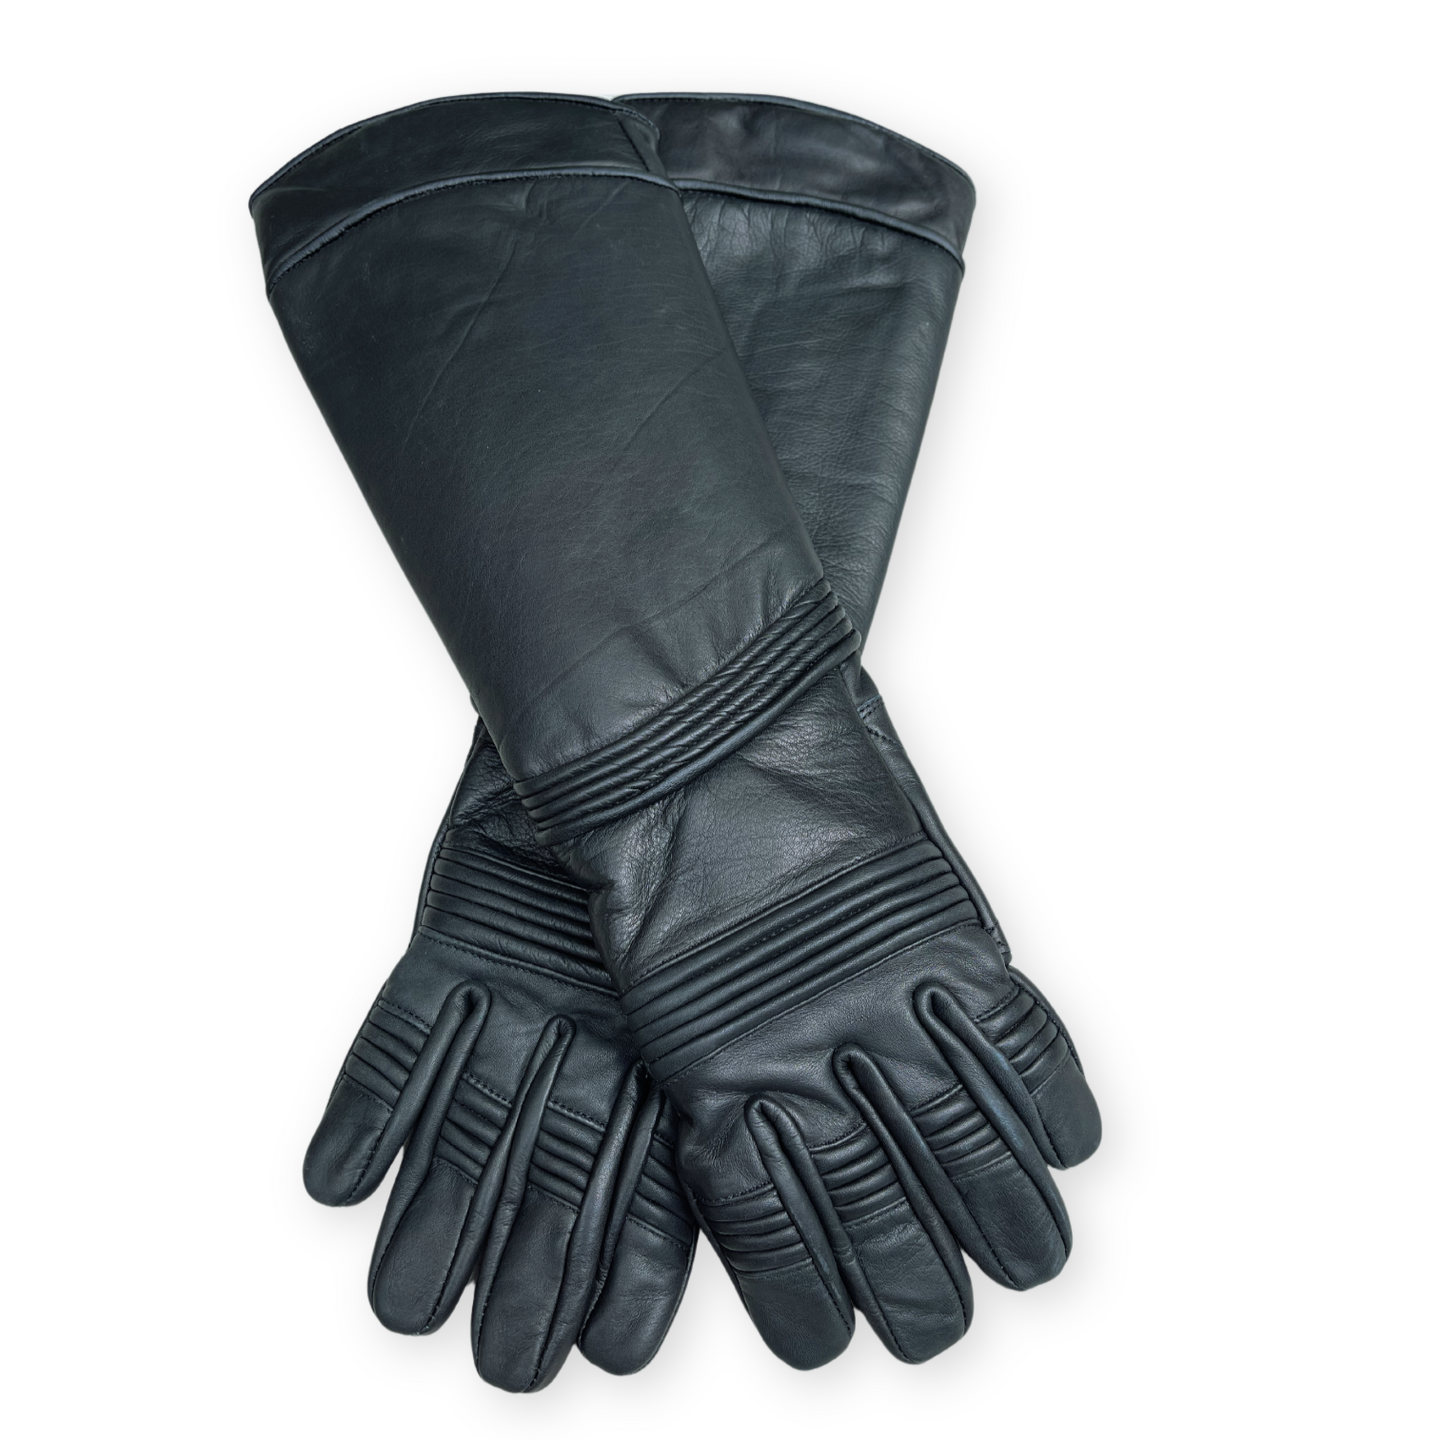 Bat Panther gloves for cosplay - George Clooney Bat and Robin/1997 & Val Kilmer Forever/1995